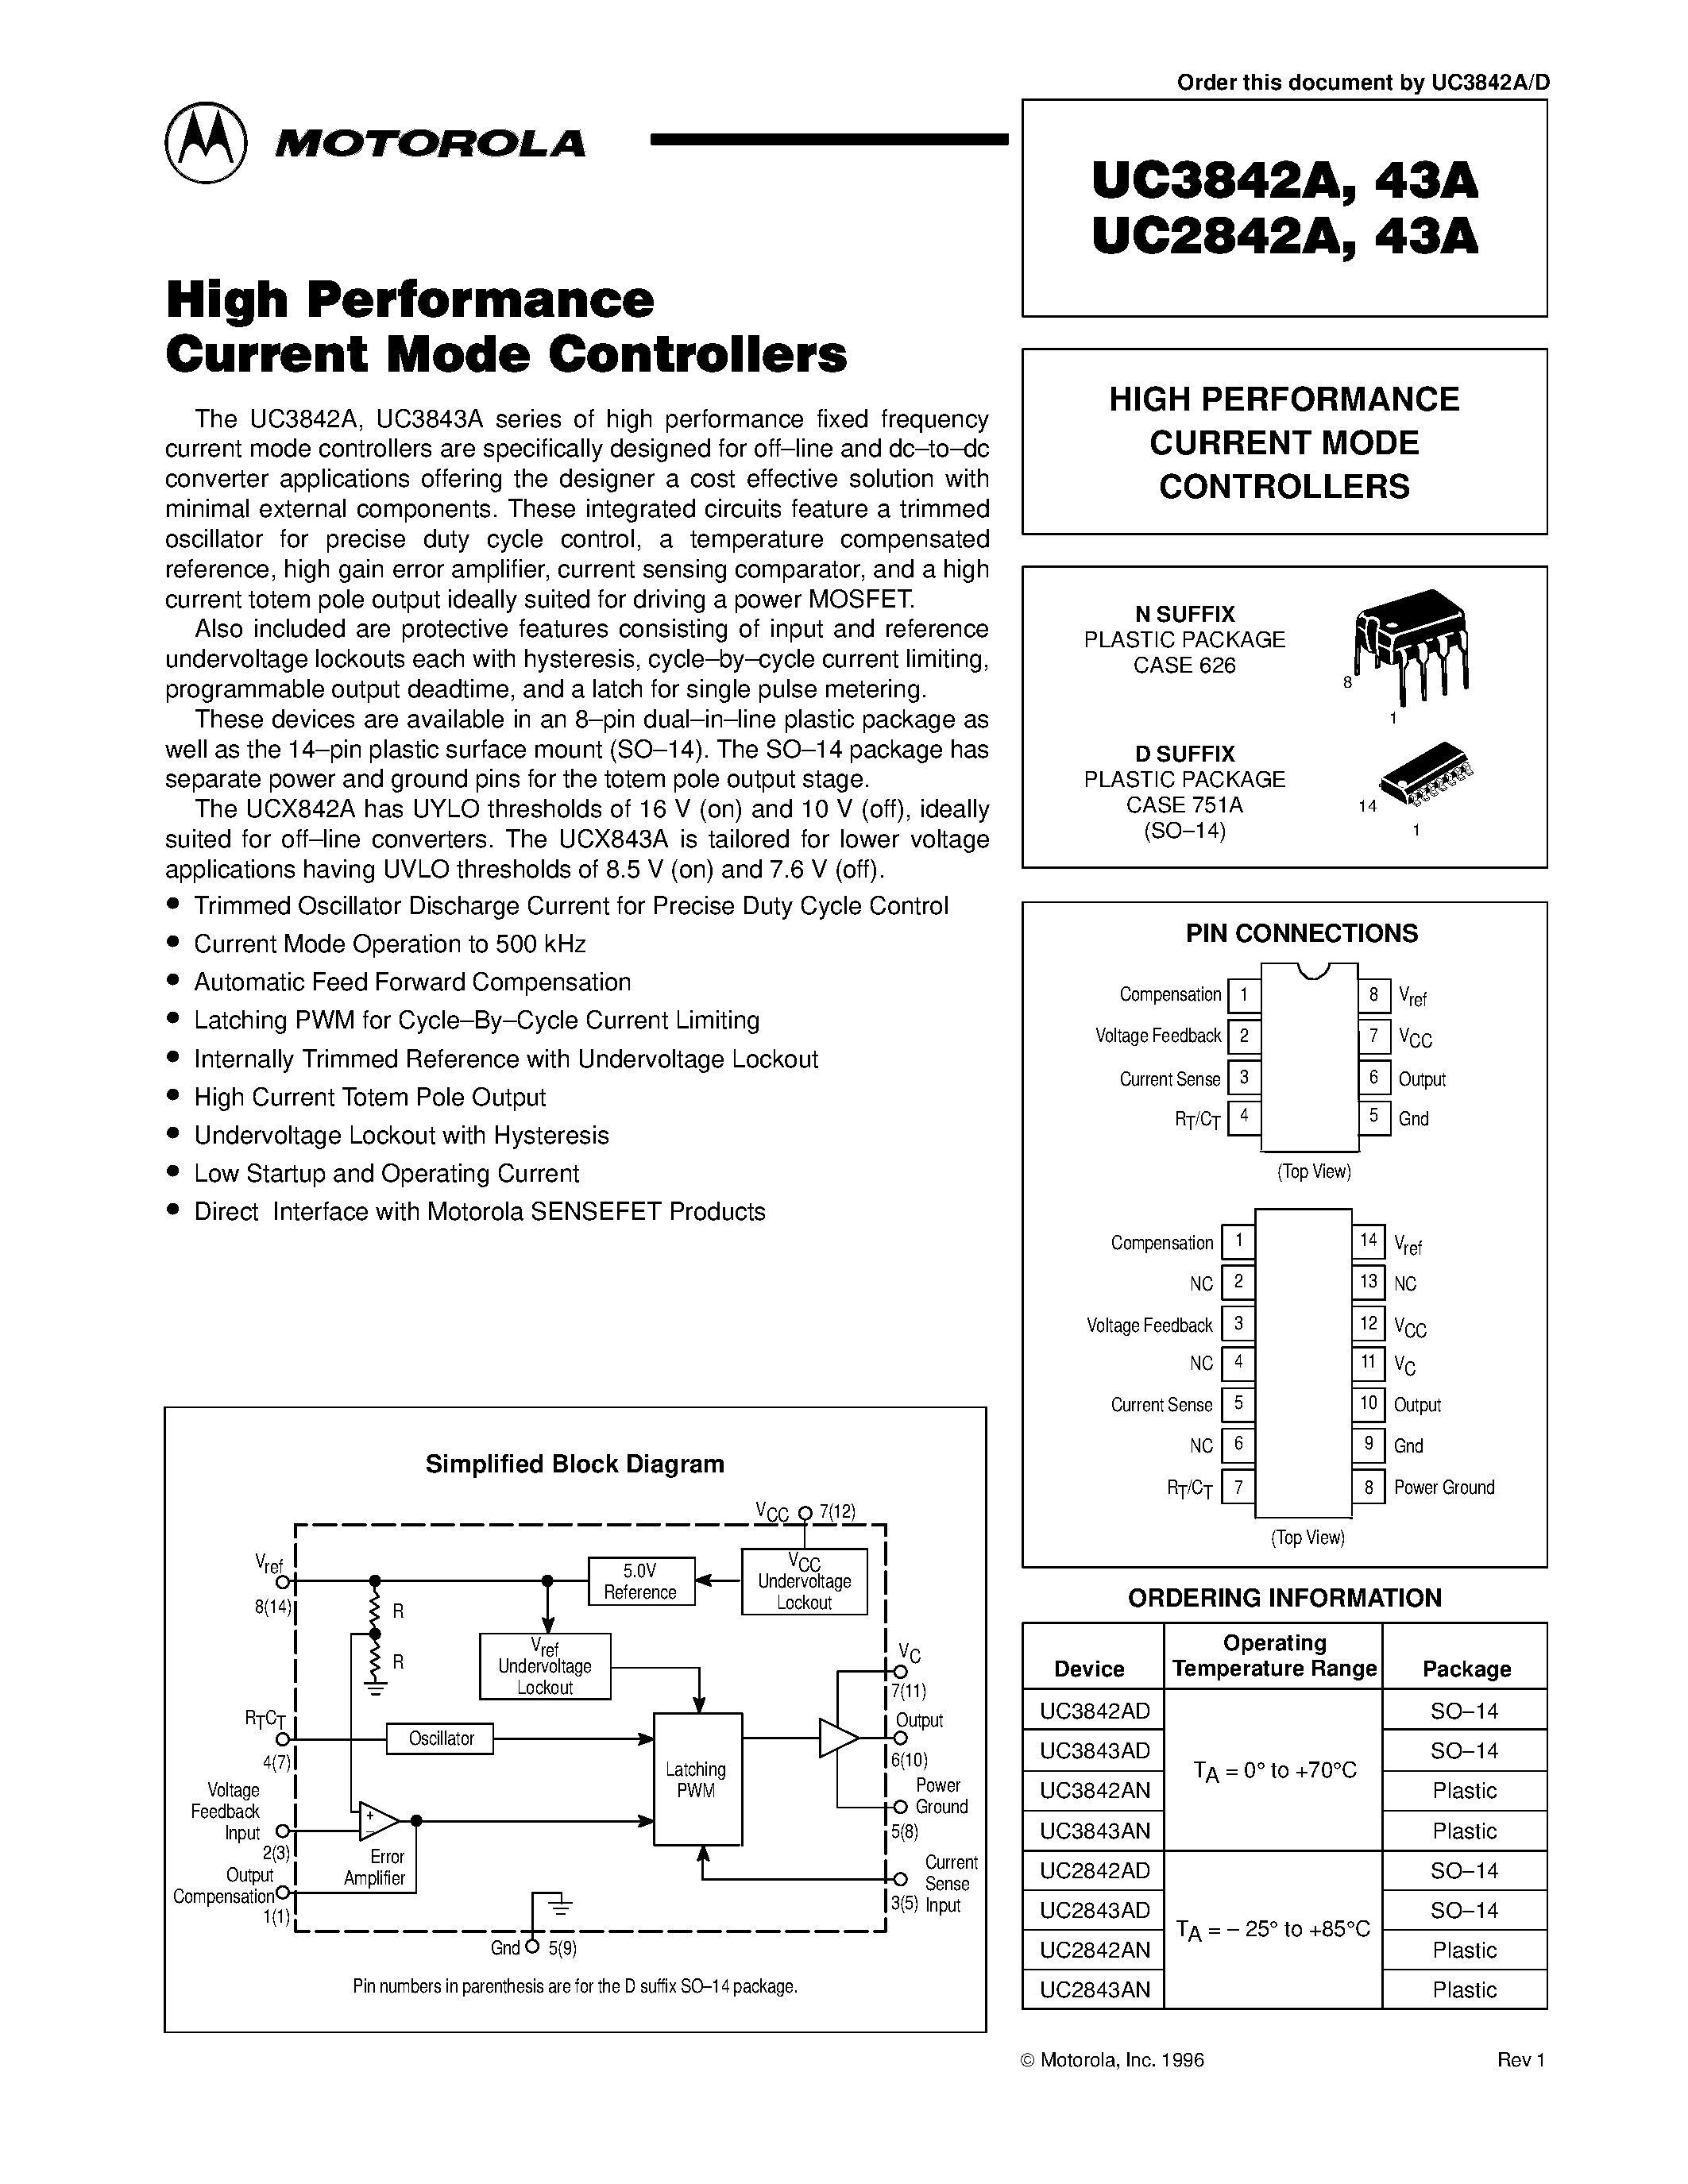 Datasheet UC2842A - (UC2842A / UC2843A) HIGH PERFORMANCE CURRENT MODE CONTROLLERS page 1